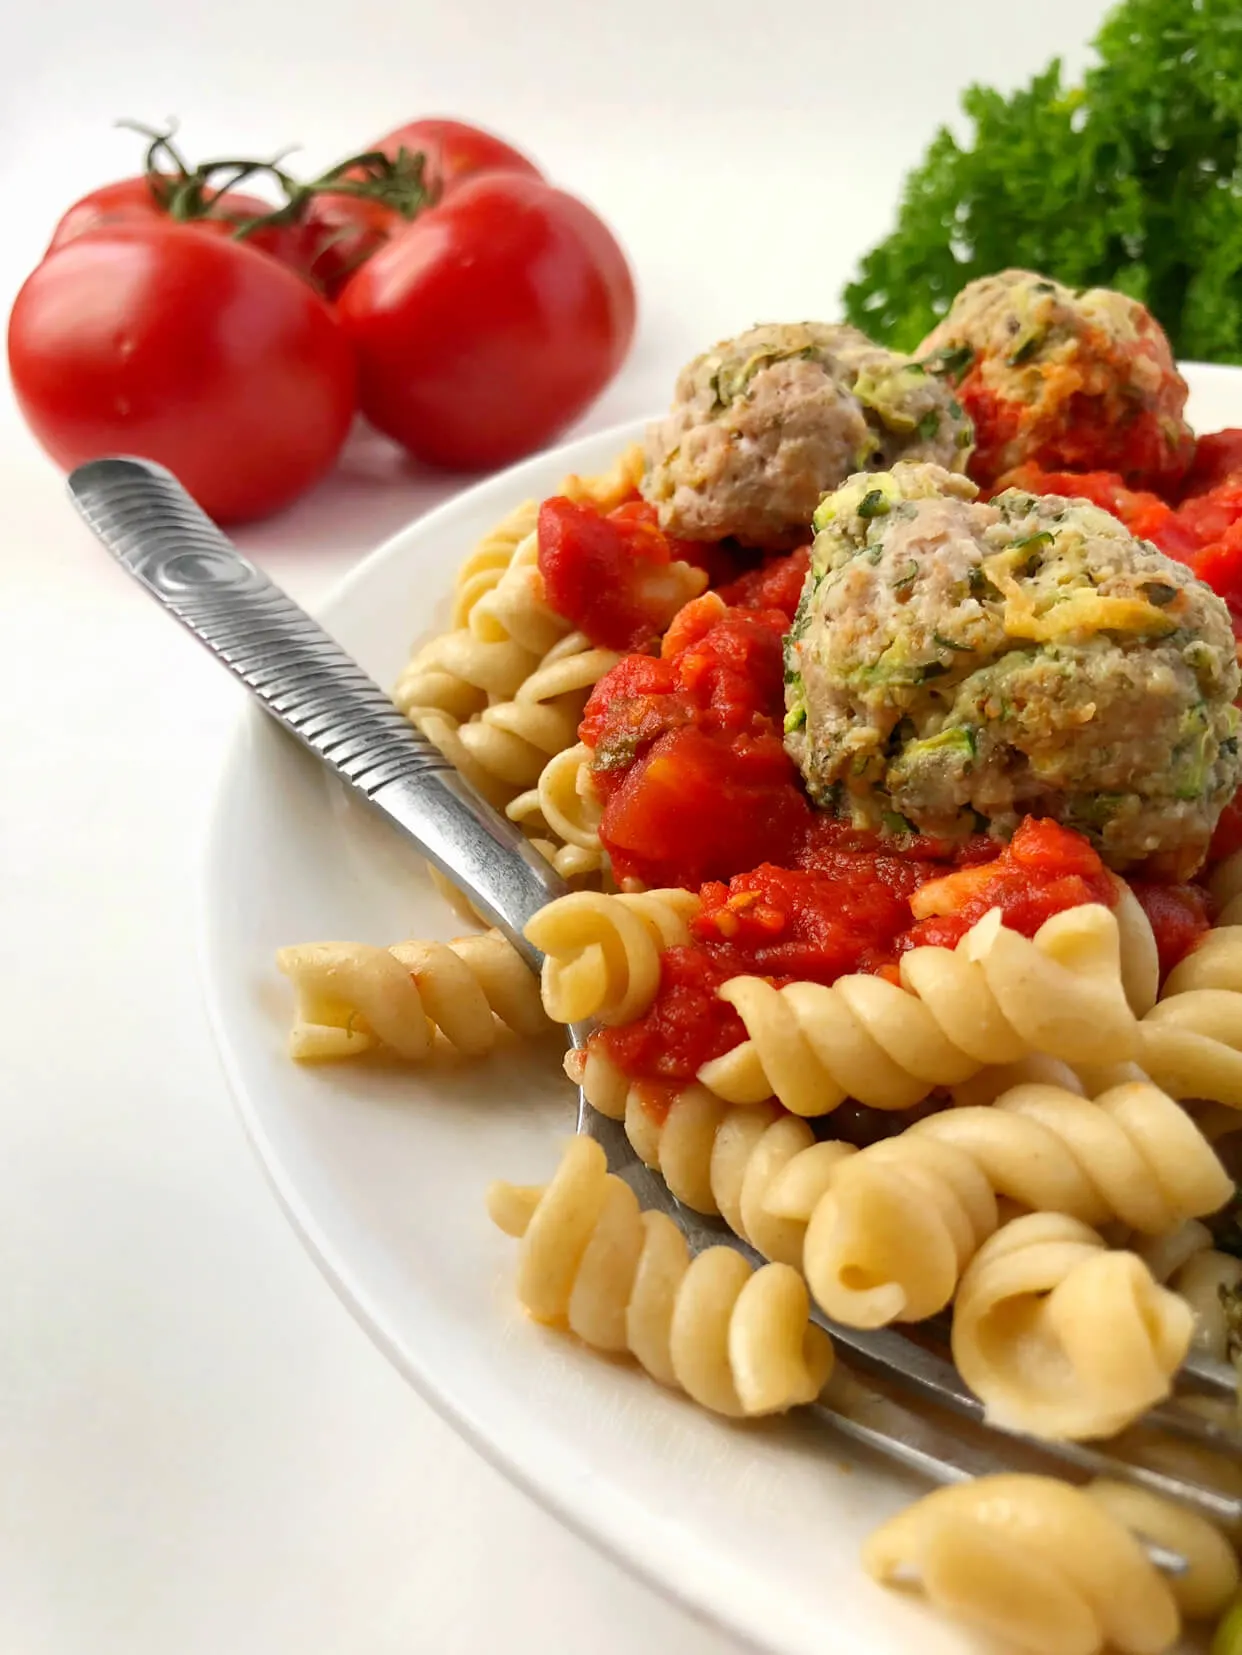 pork zucchini meatballs on a bed of pasta with sauce